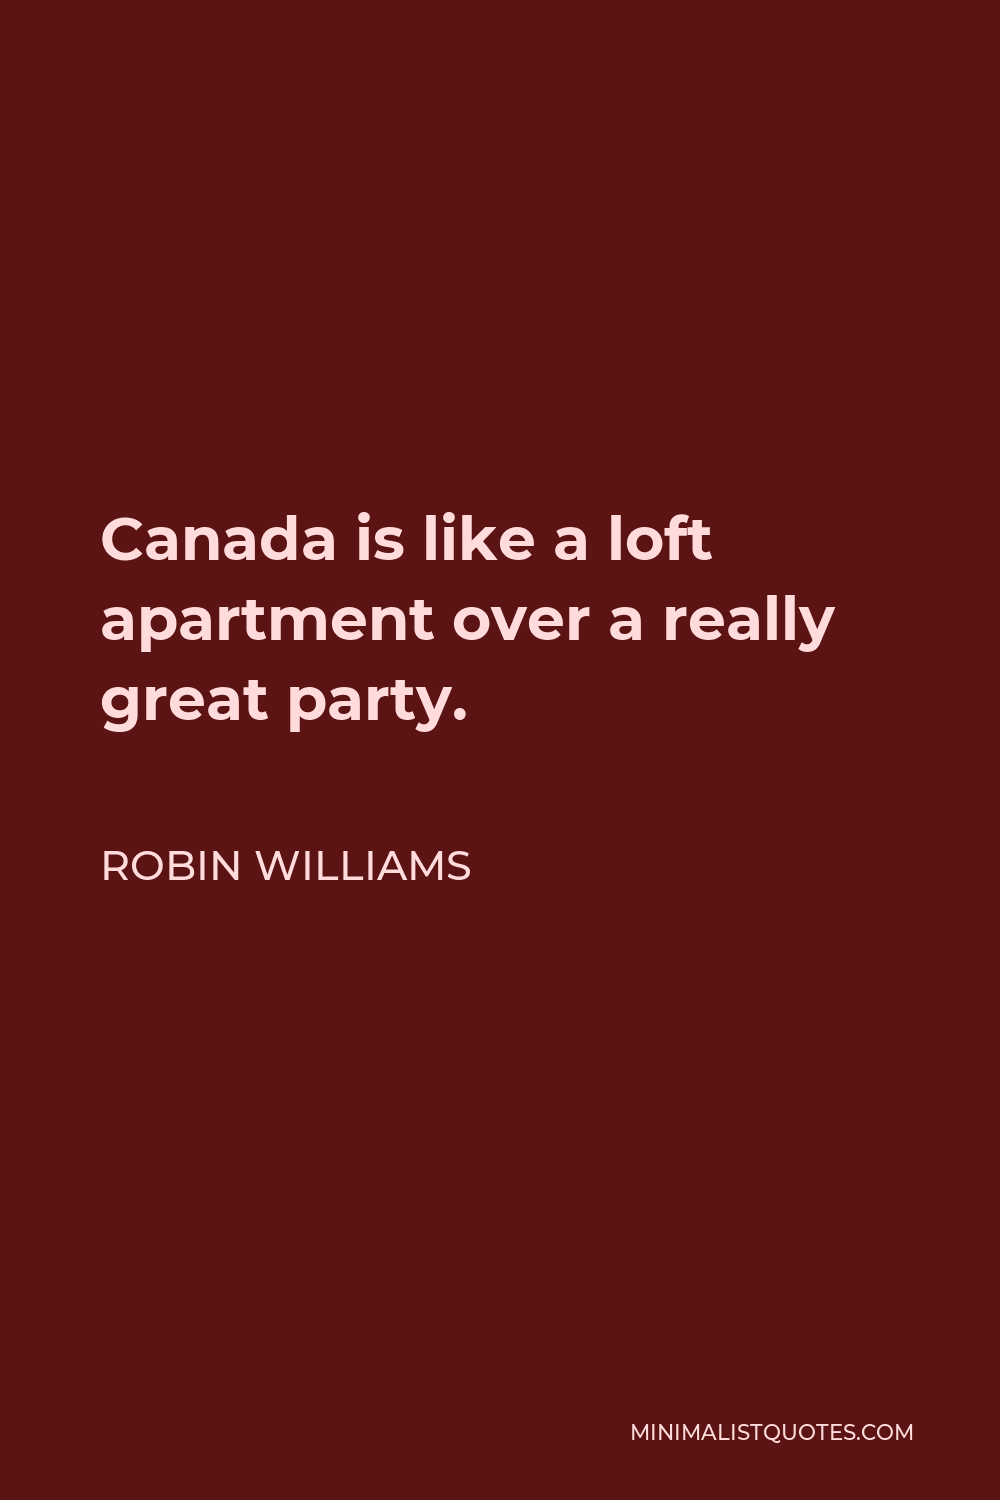 Robin Williams Quote - Canada is like a loft apartment over a really great party.